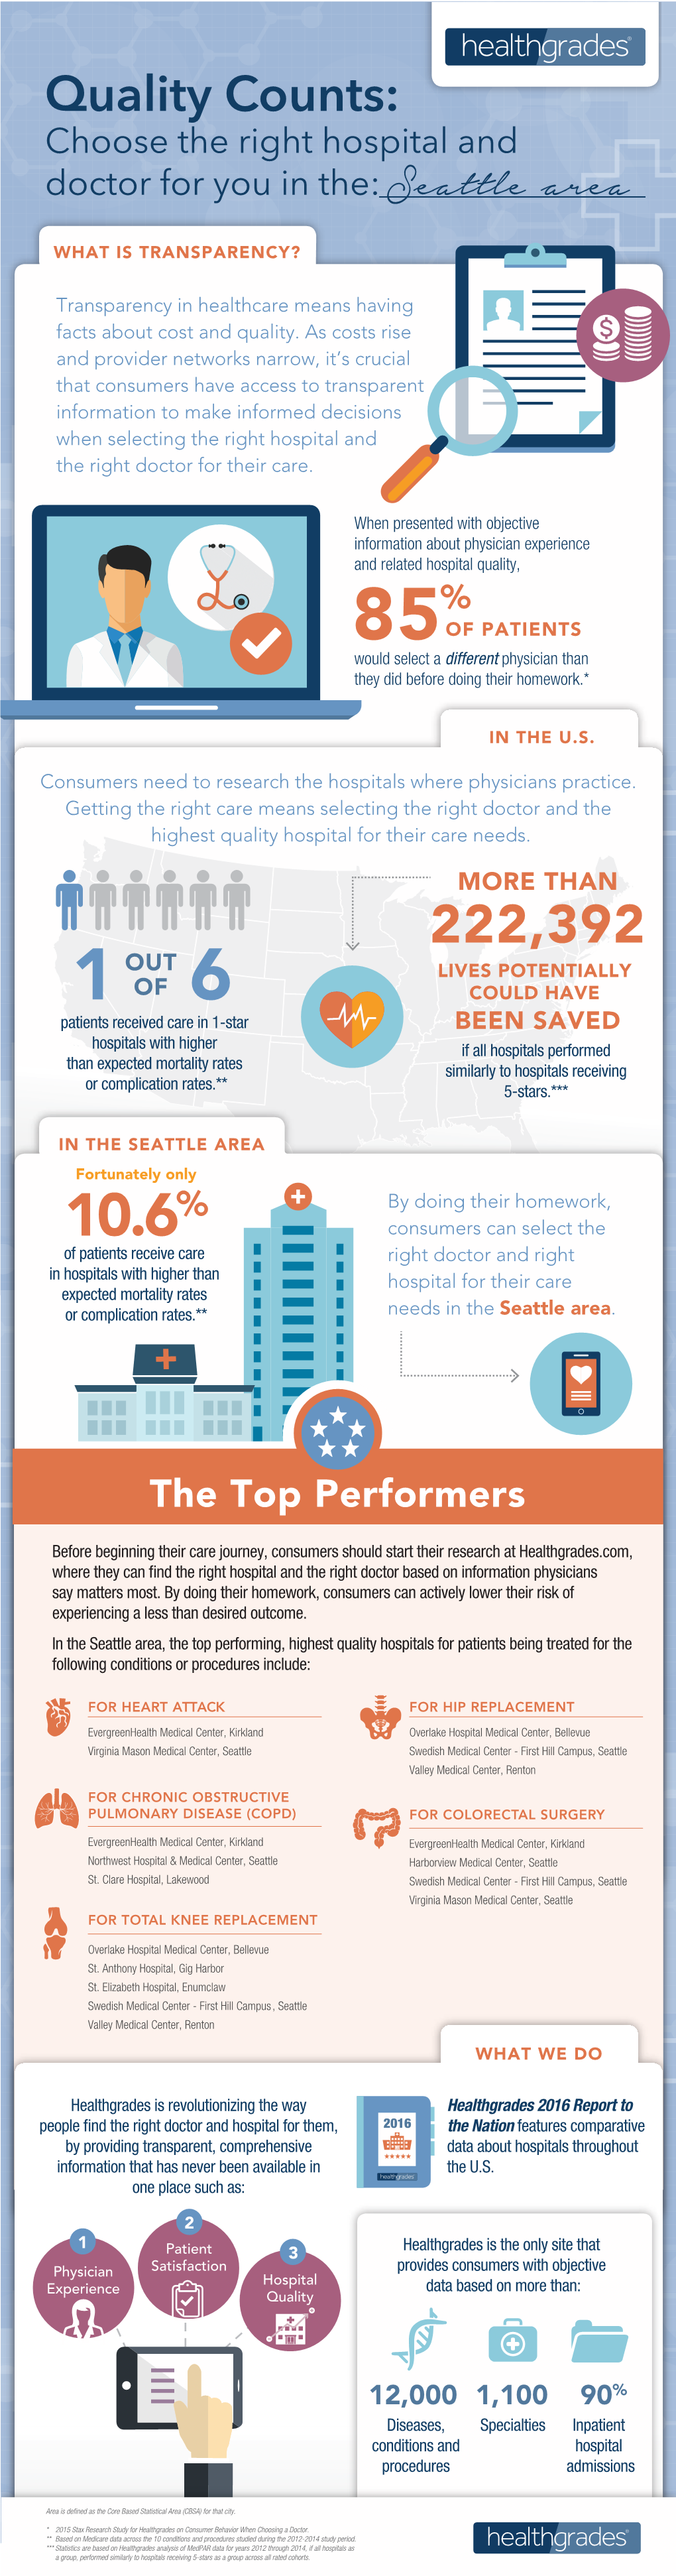 Quality Counts: Choose the Right Hospital and Doctor for You in The: Seattle Area